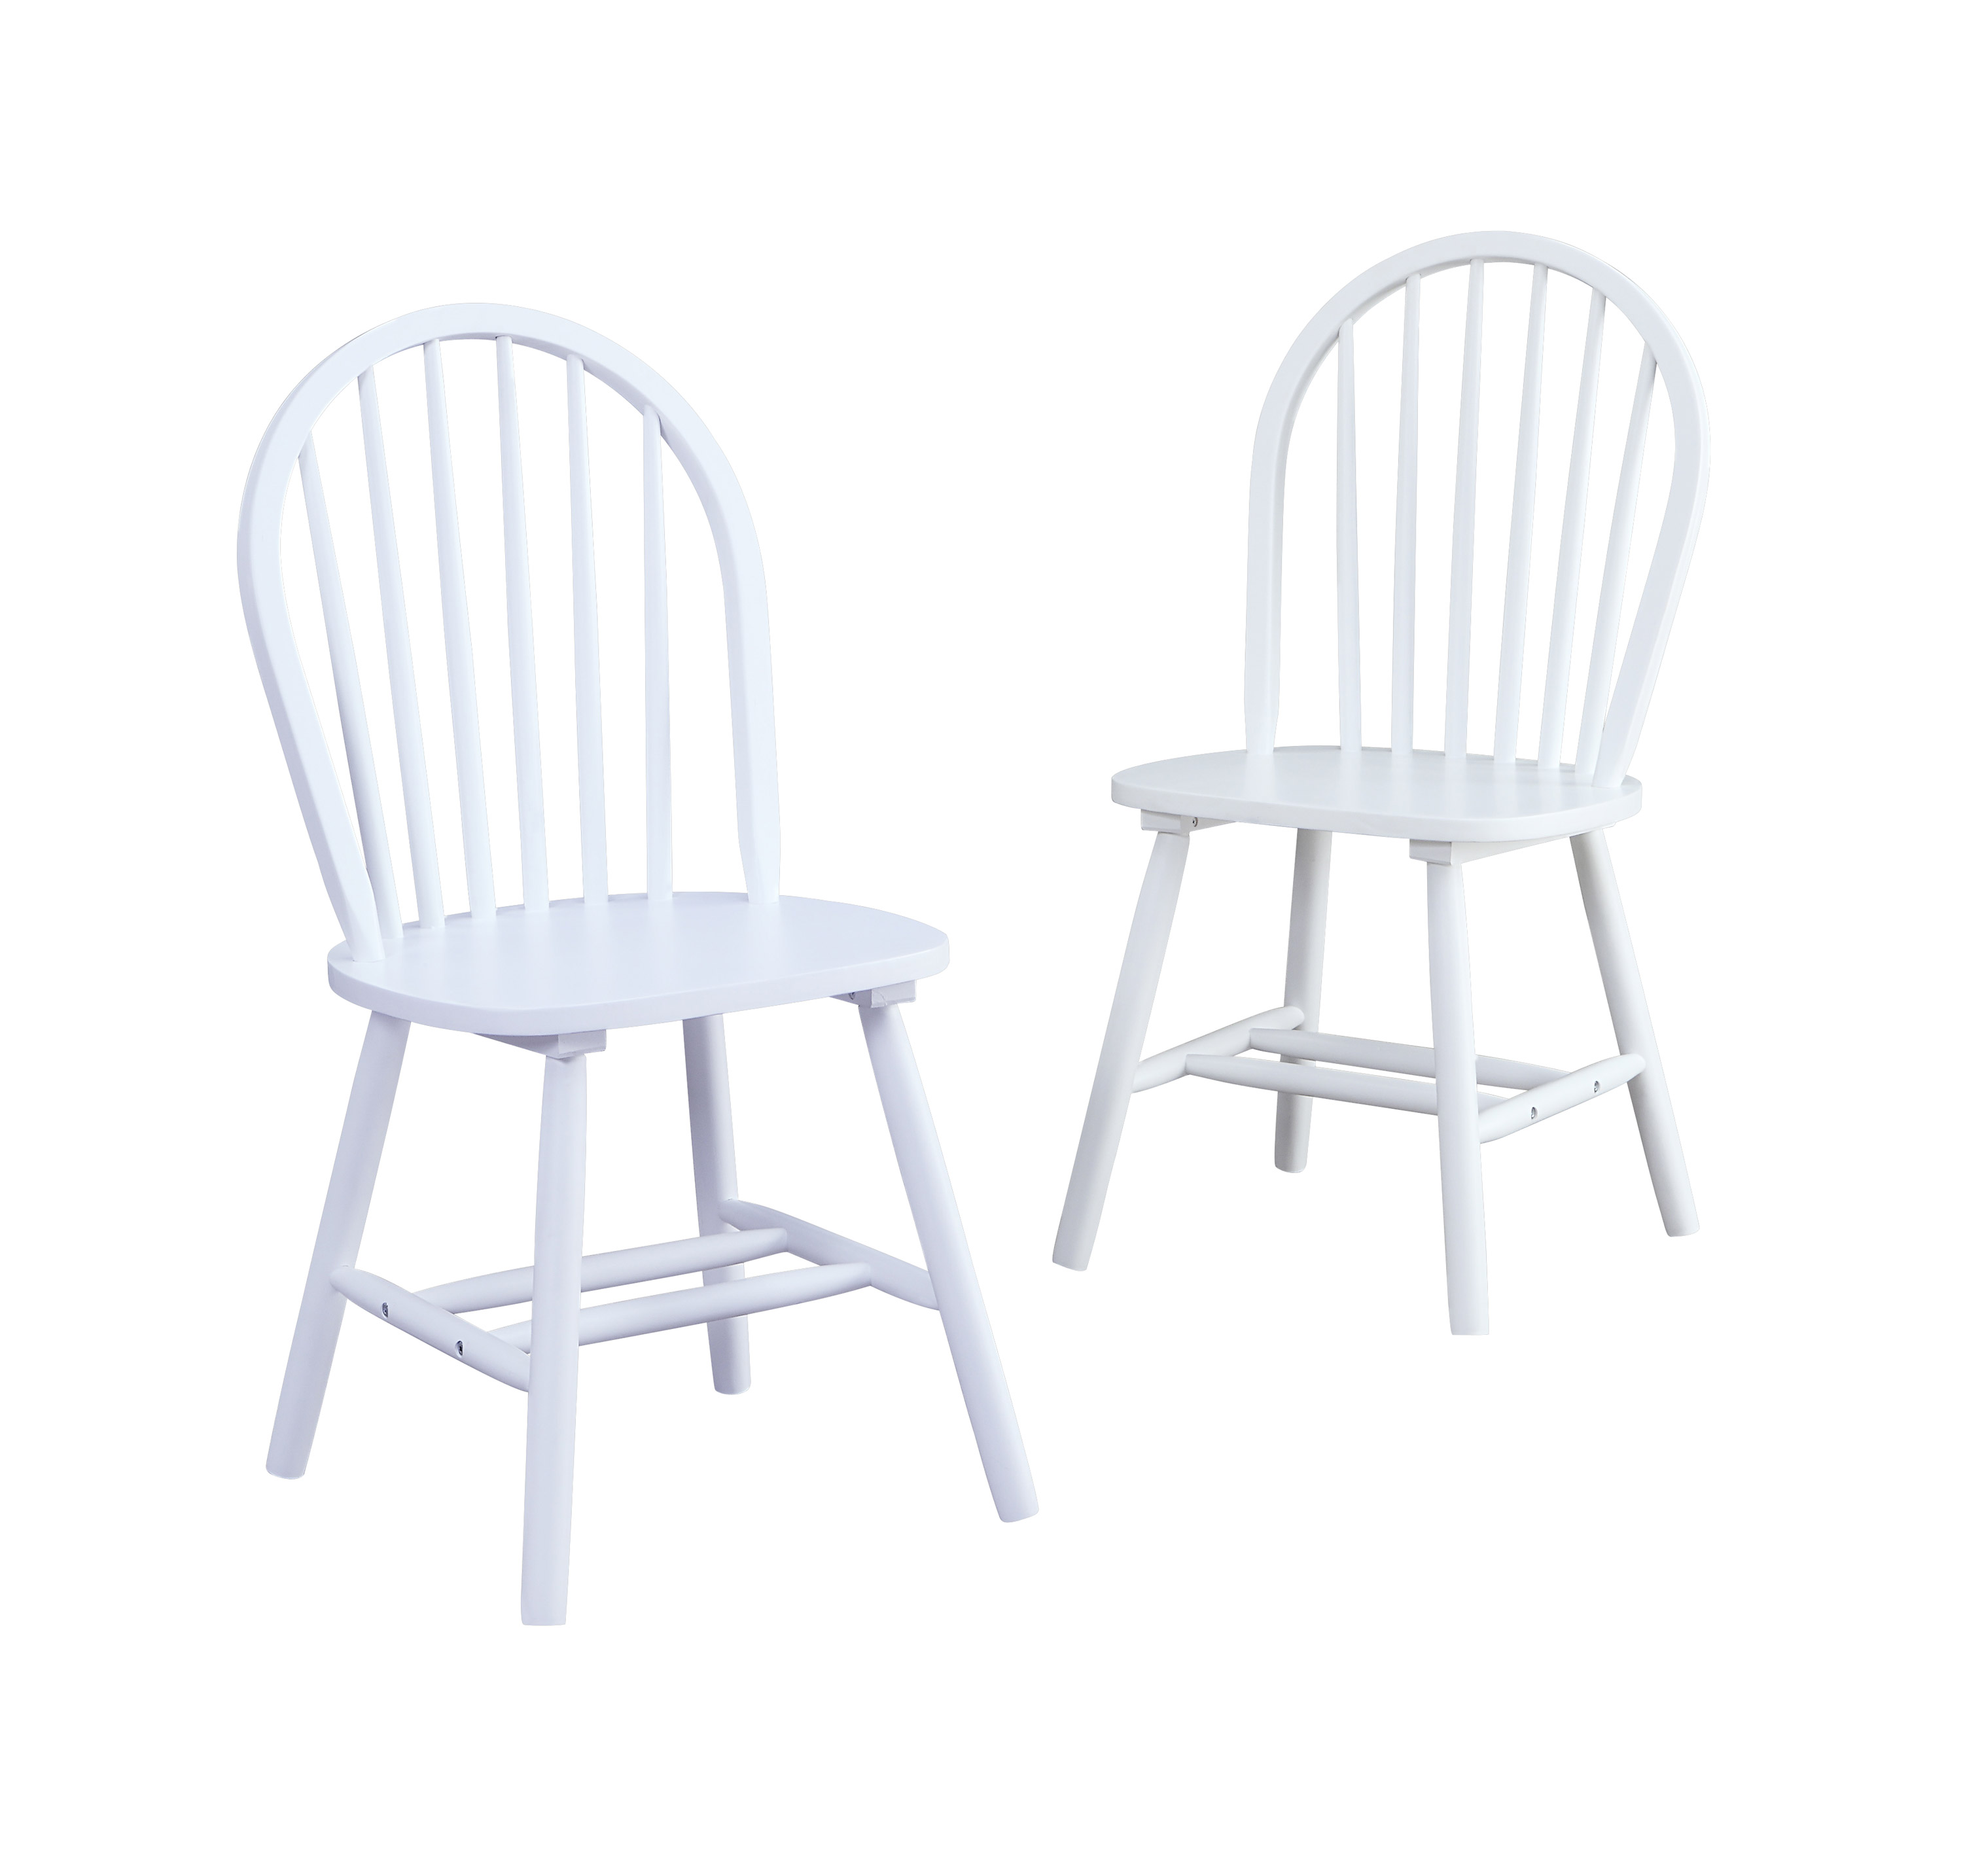 Better Homes and Gardens Autumn Lane Windsor Solid Wood Dining Chairs, Set of 2, Solid White - image 1 of 10